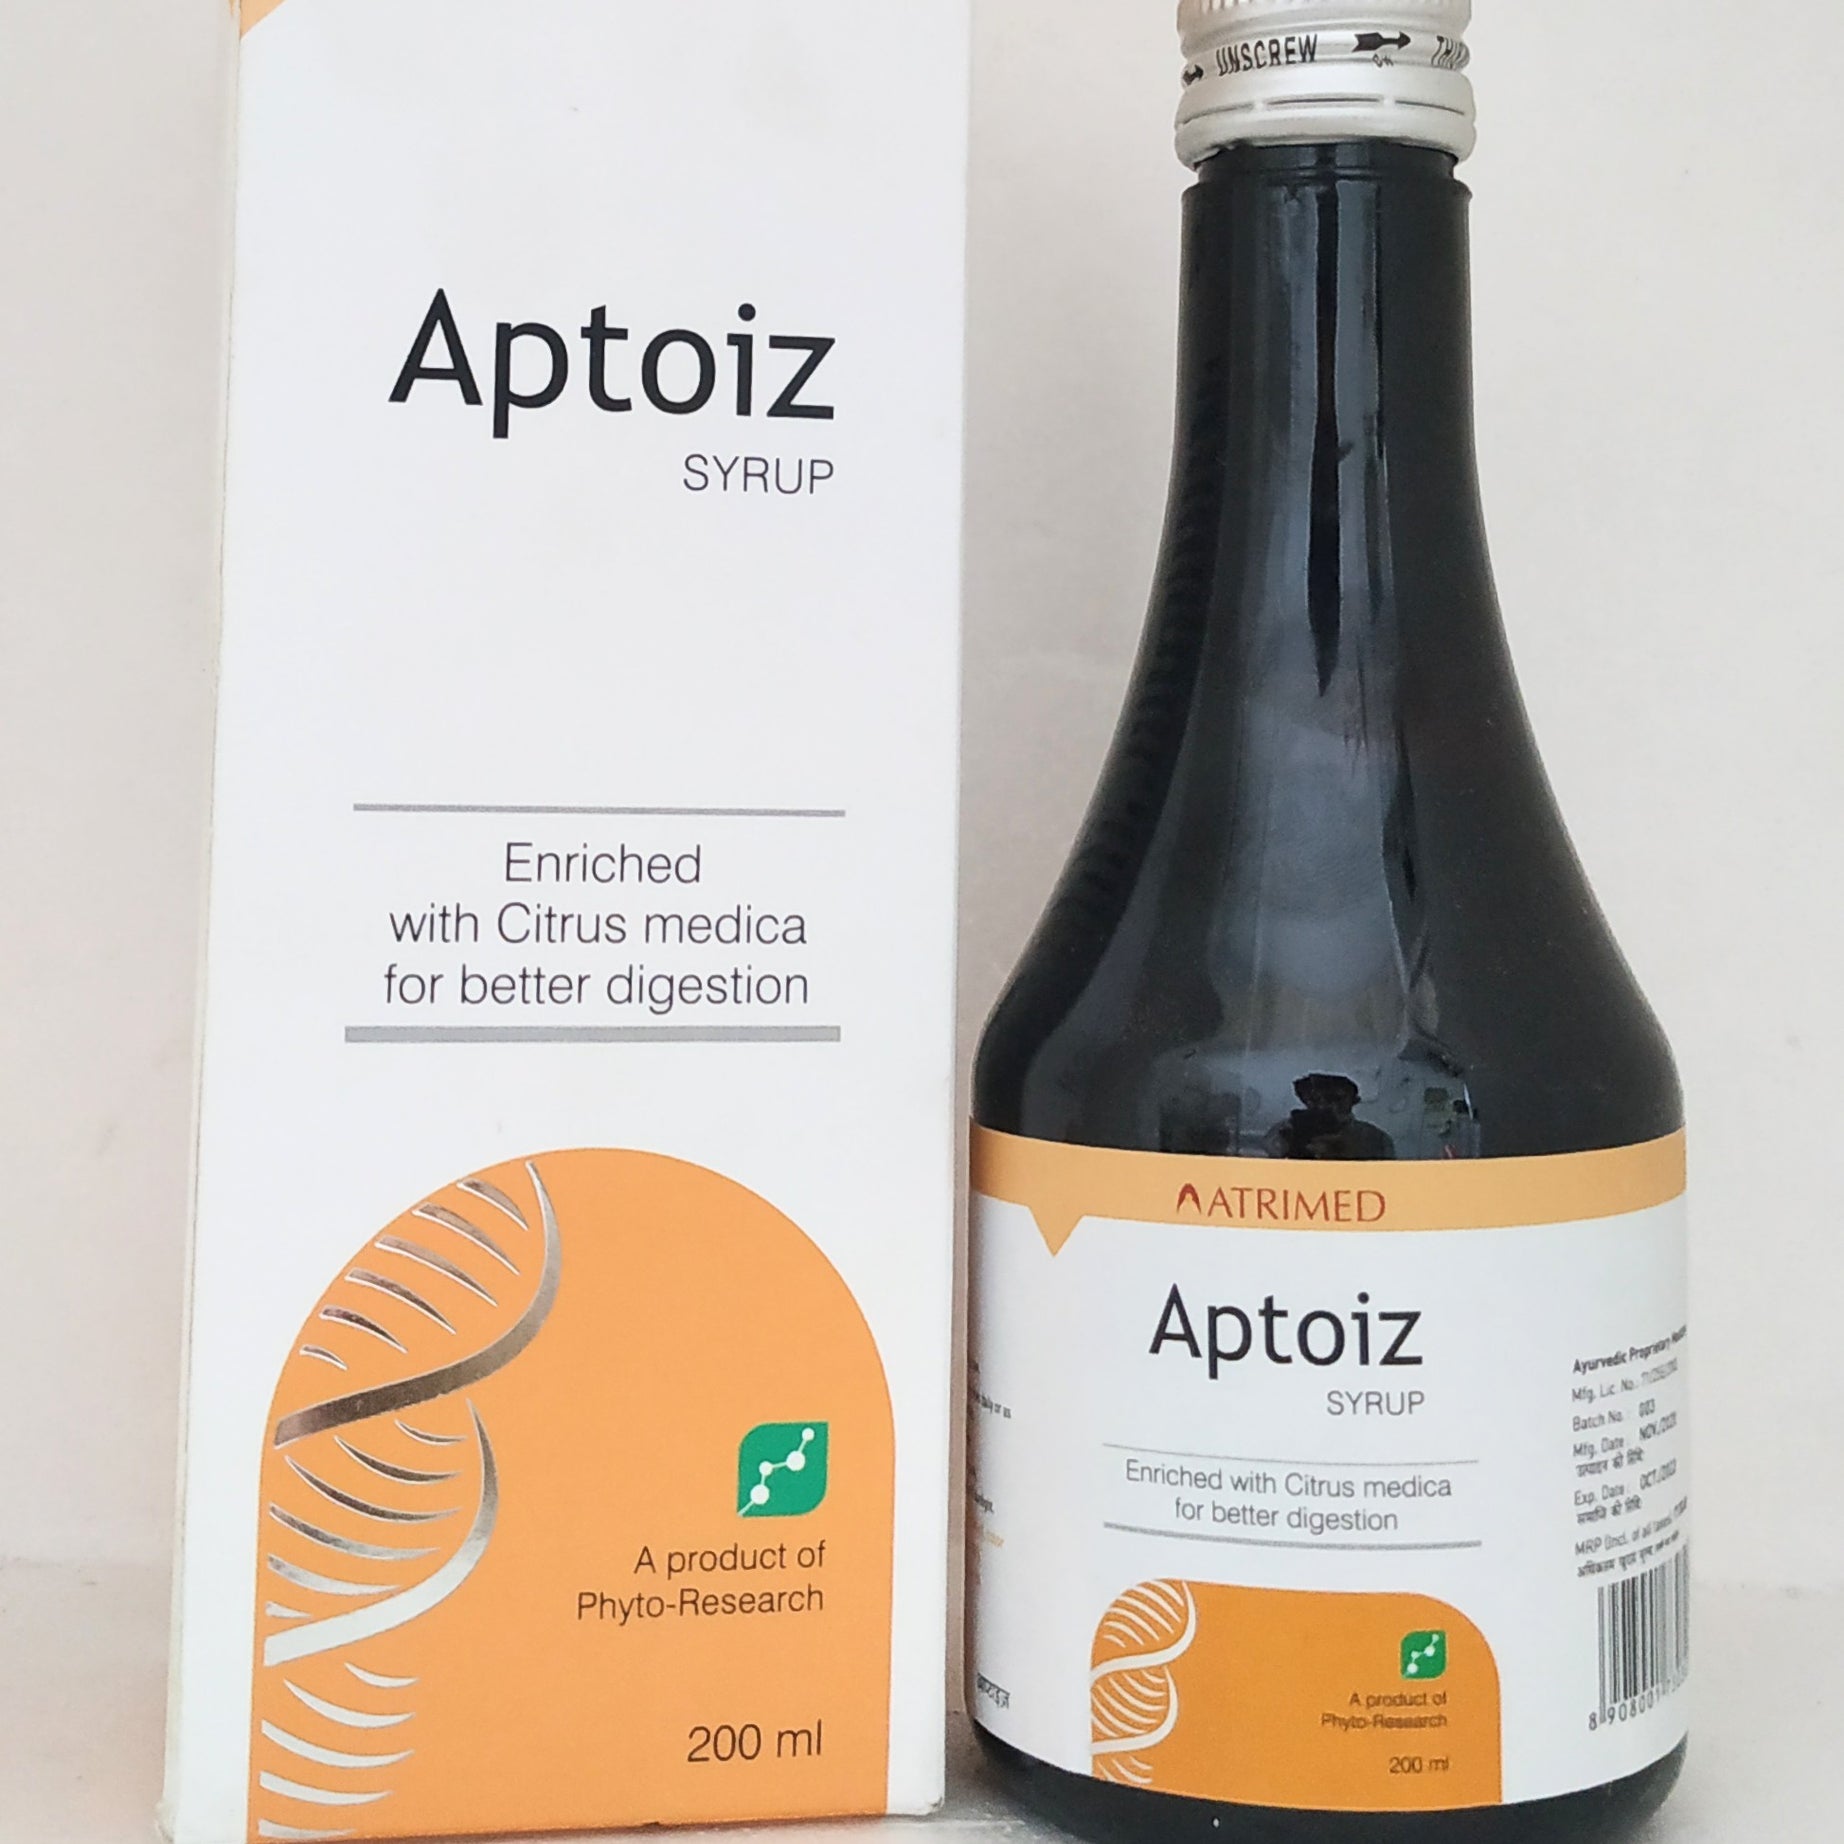 Shop Aptoiz Syrup 200ml at price 130.00 from Atrimed Online - Ayush Care